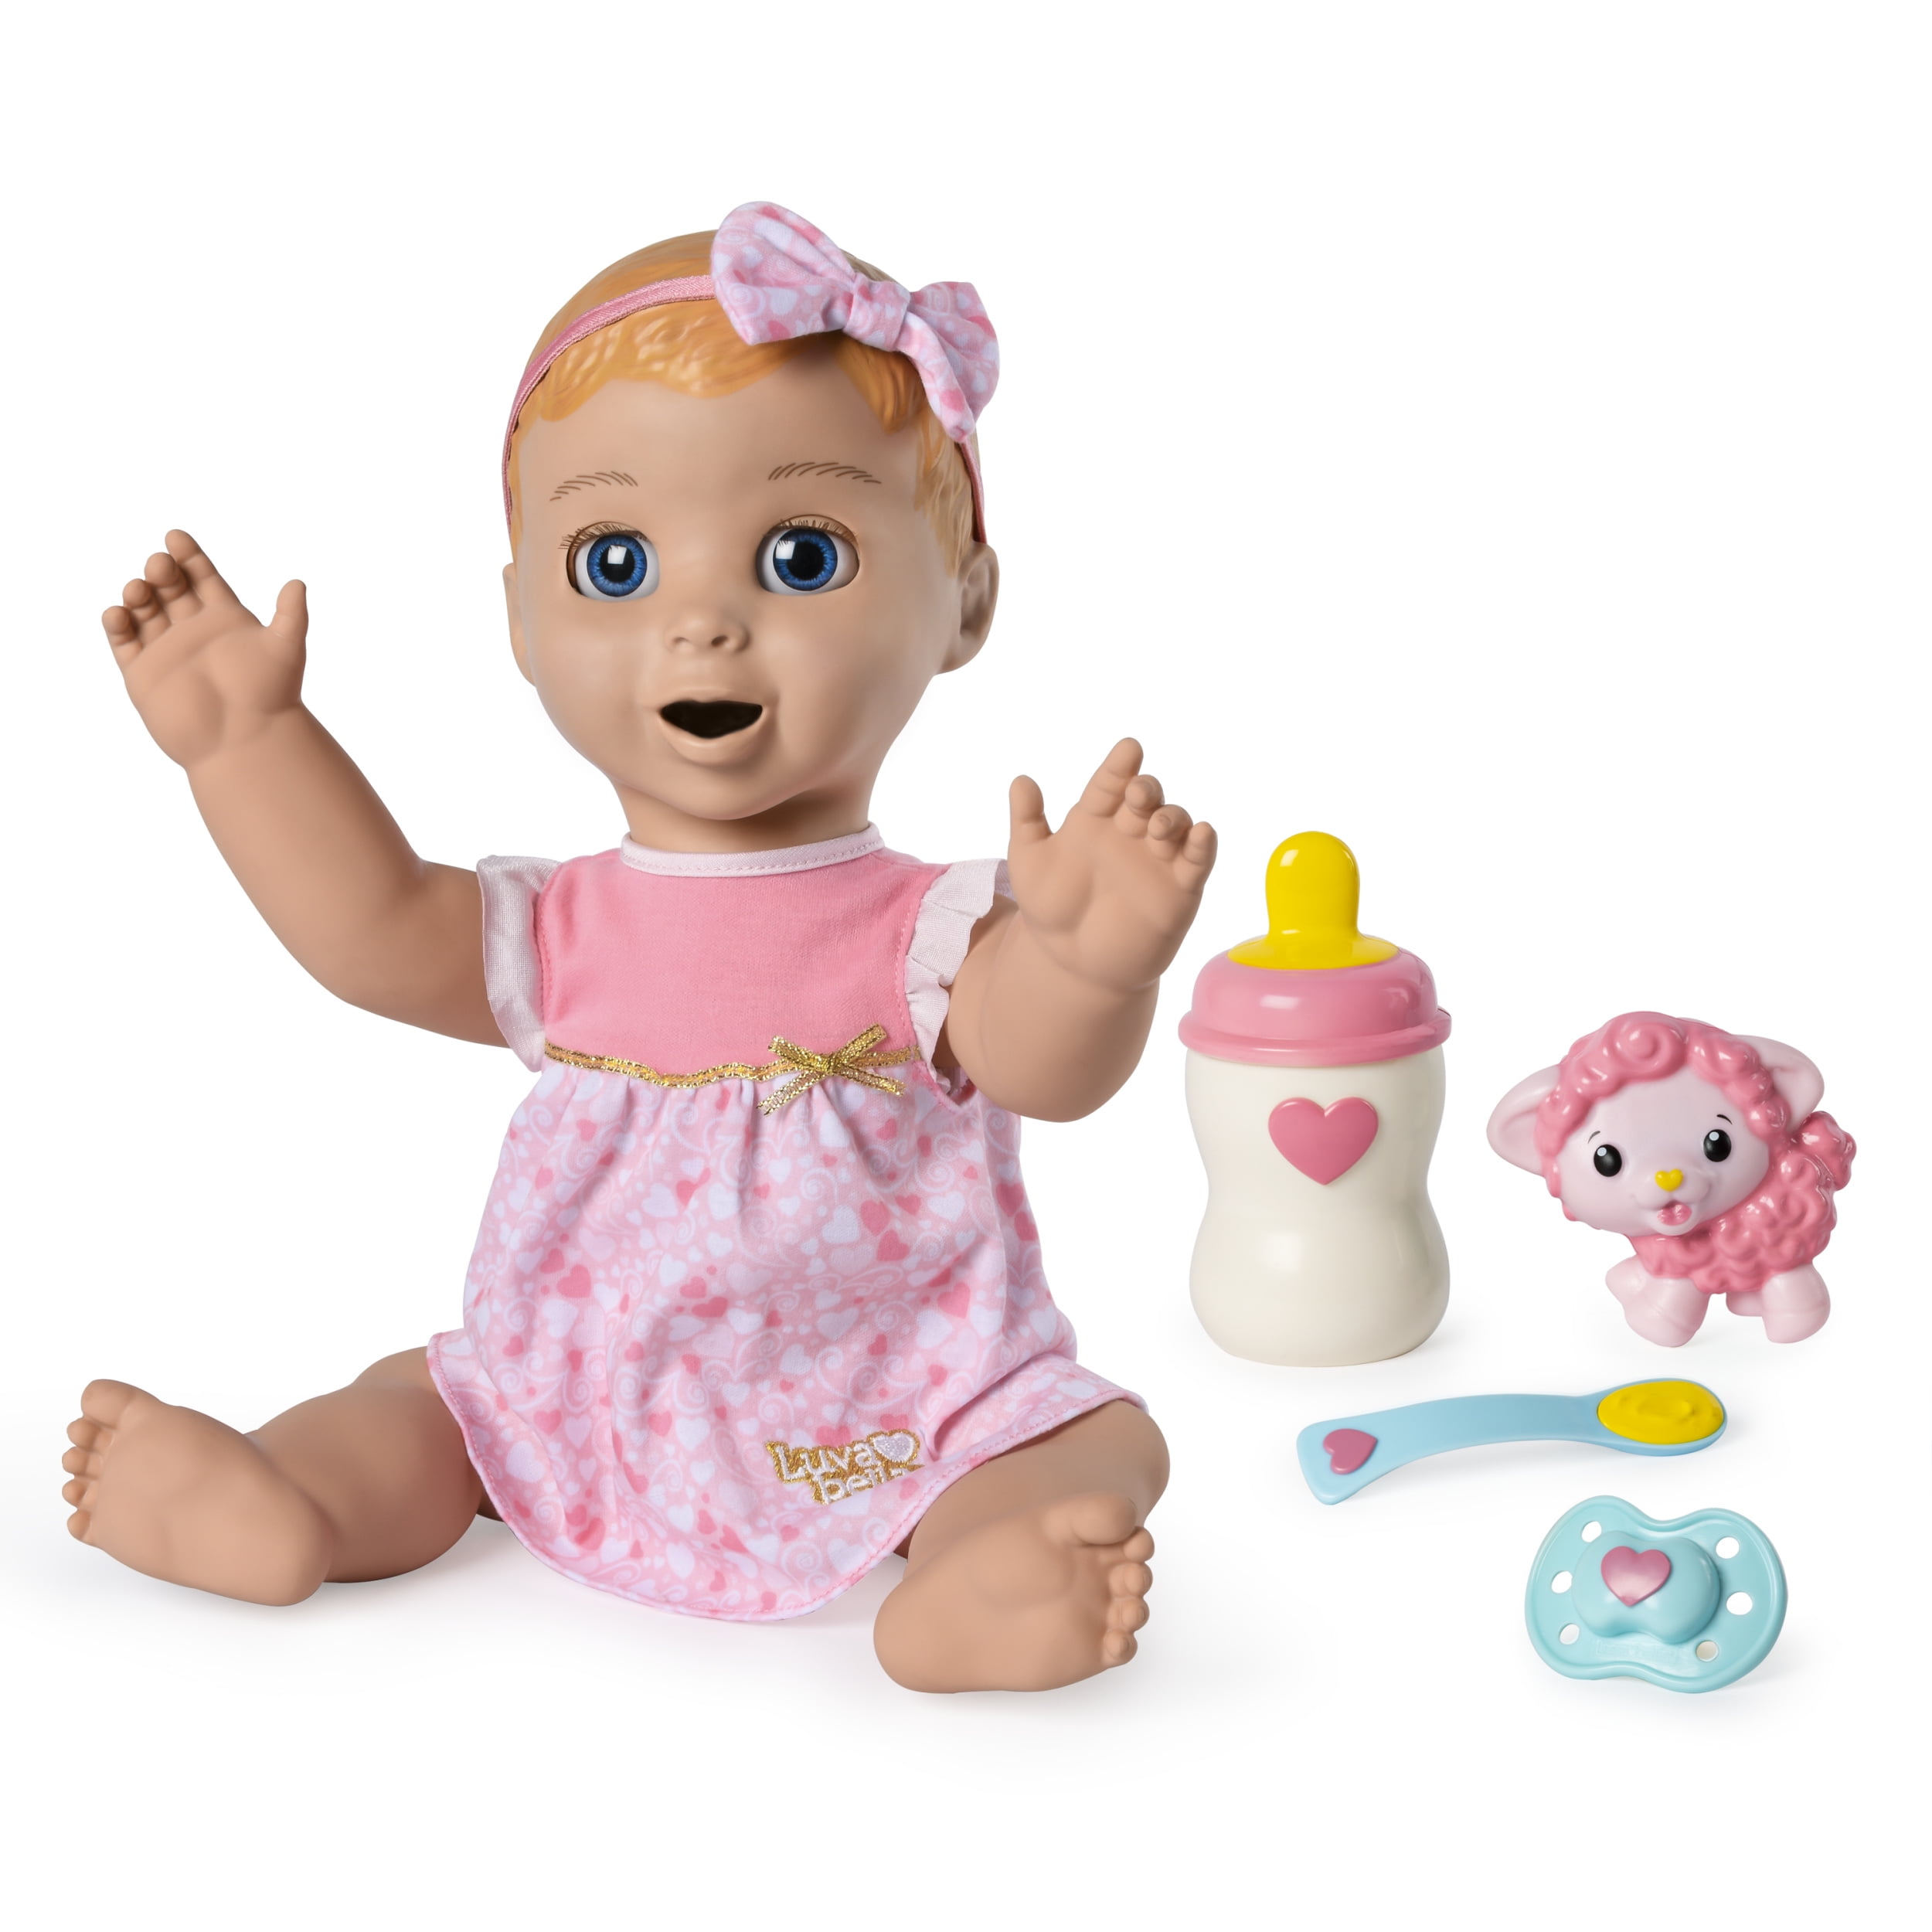 Luvabella Blonde Hair, Responsive Baby Doll with Real ...